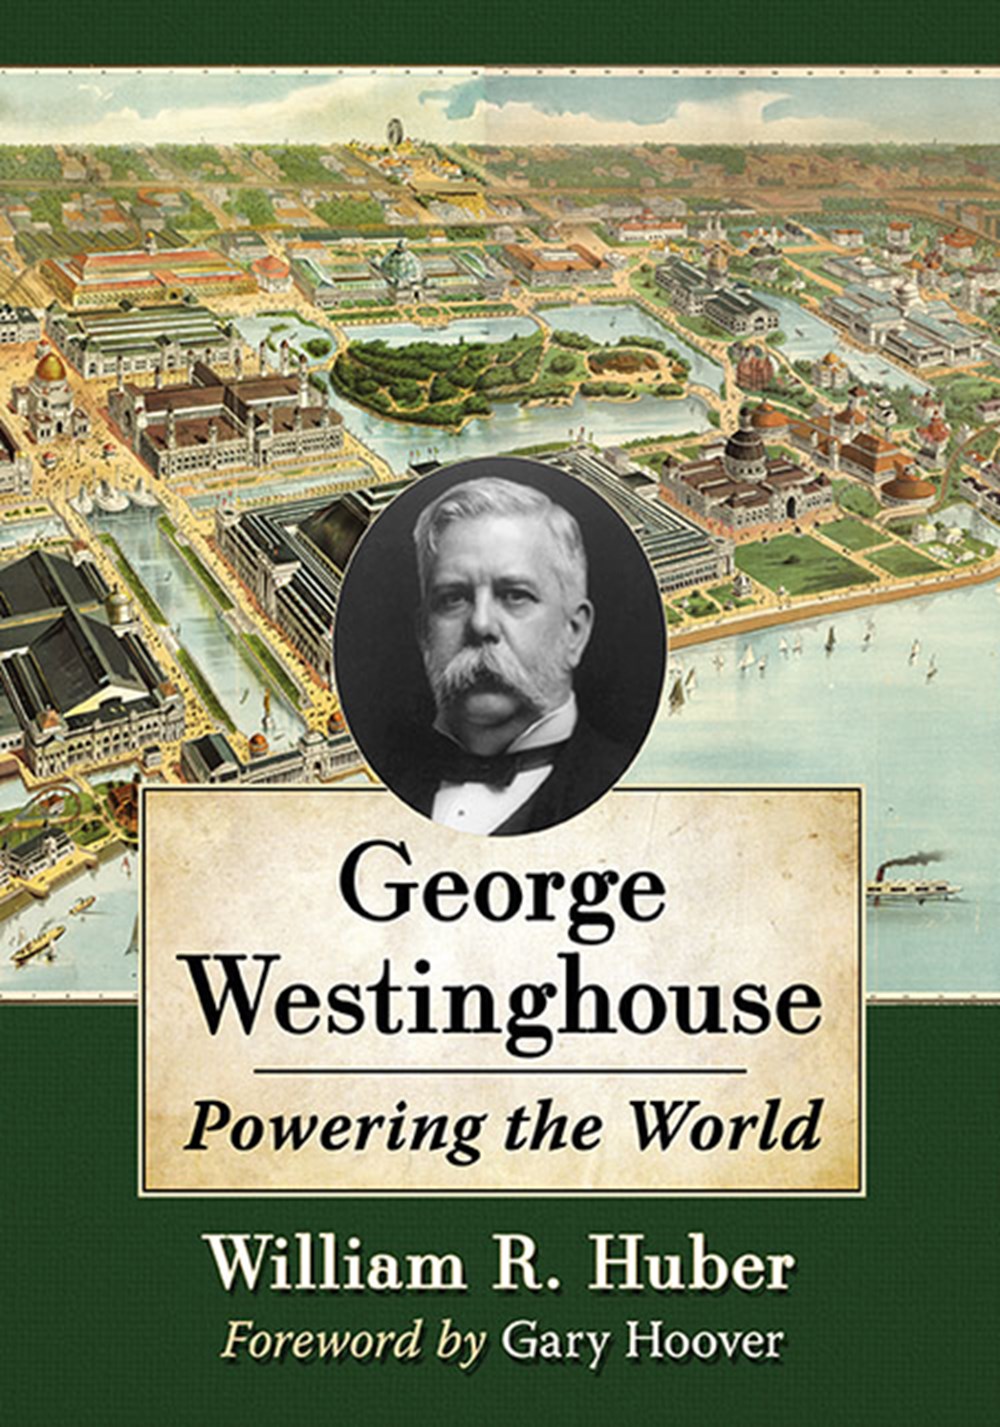 George Westinghouse: Powering the World